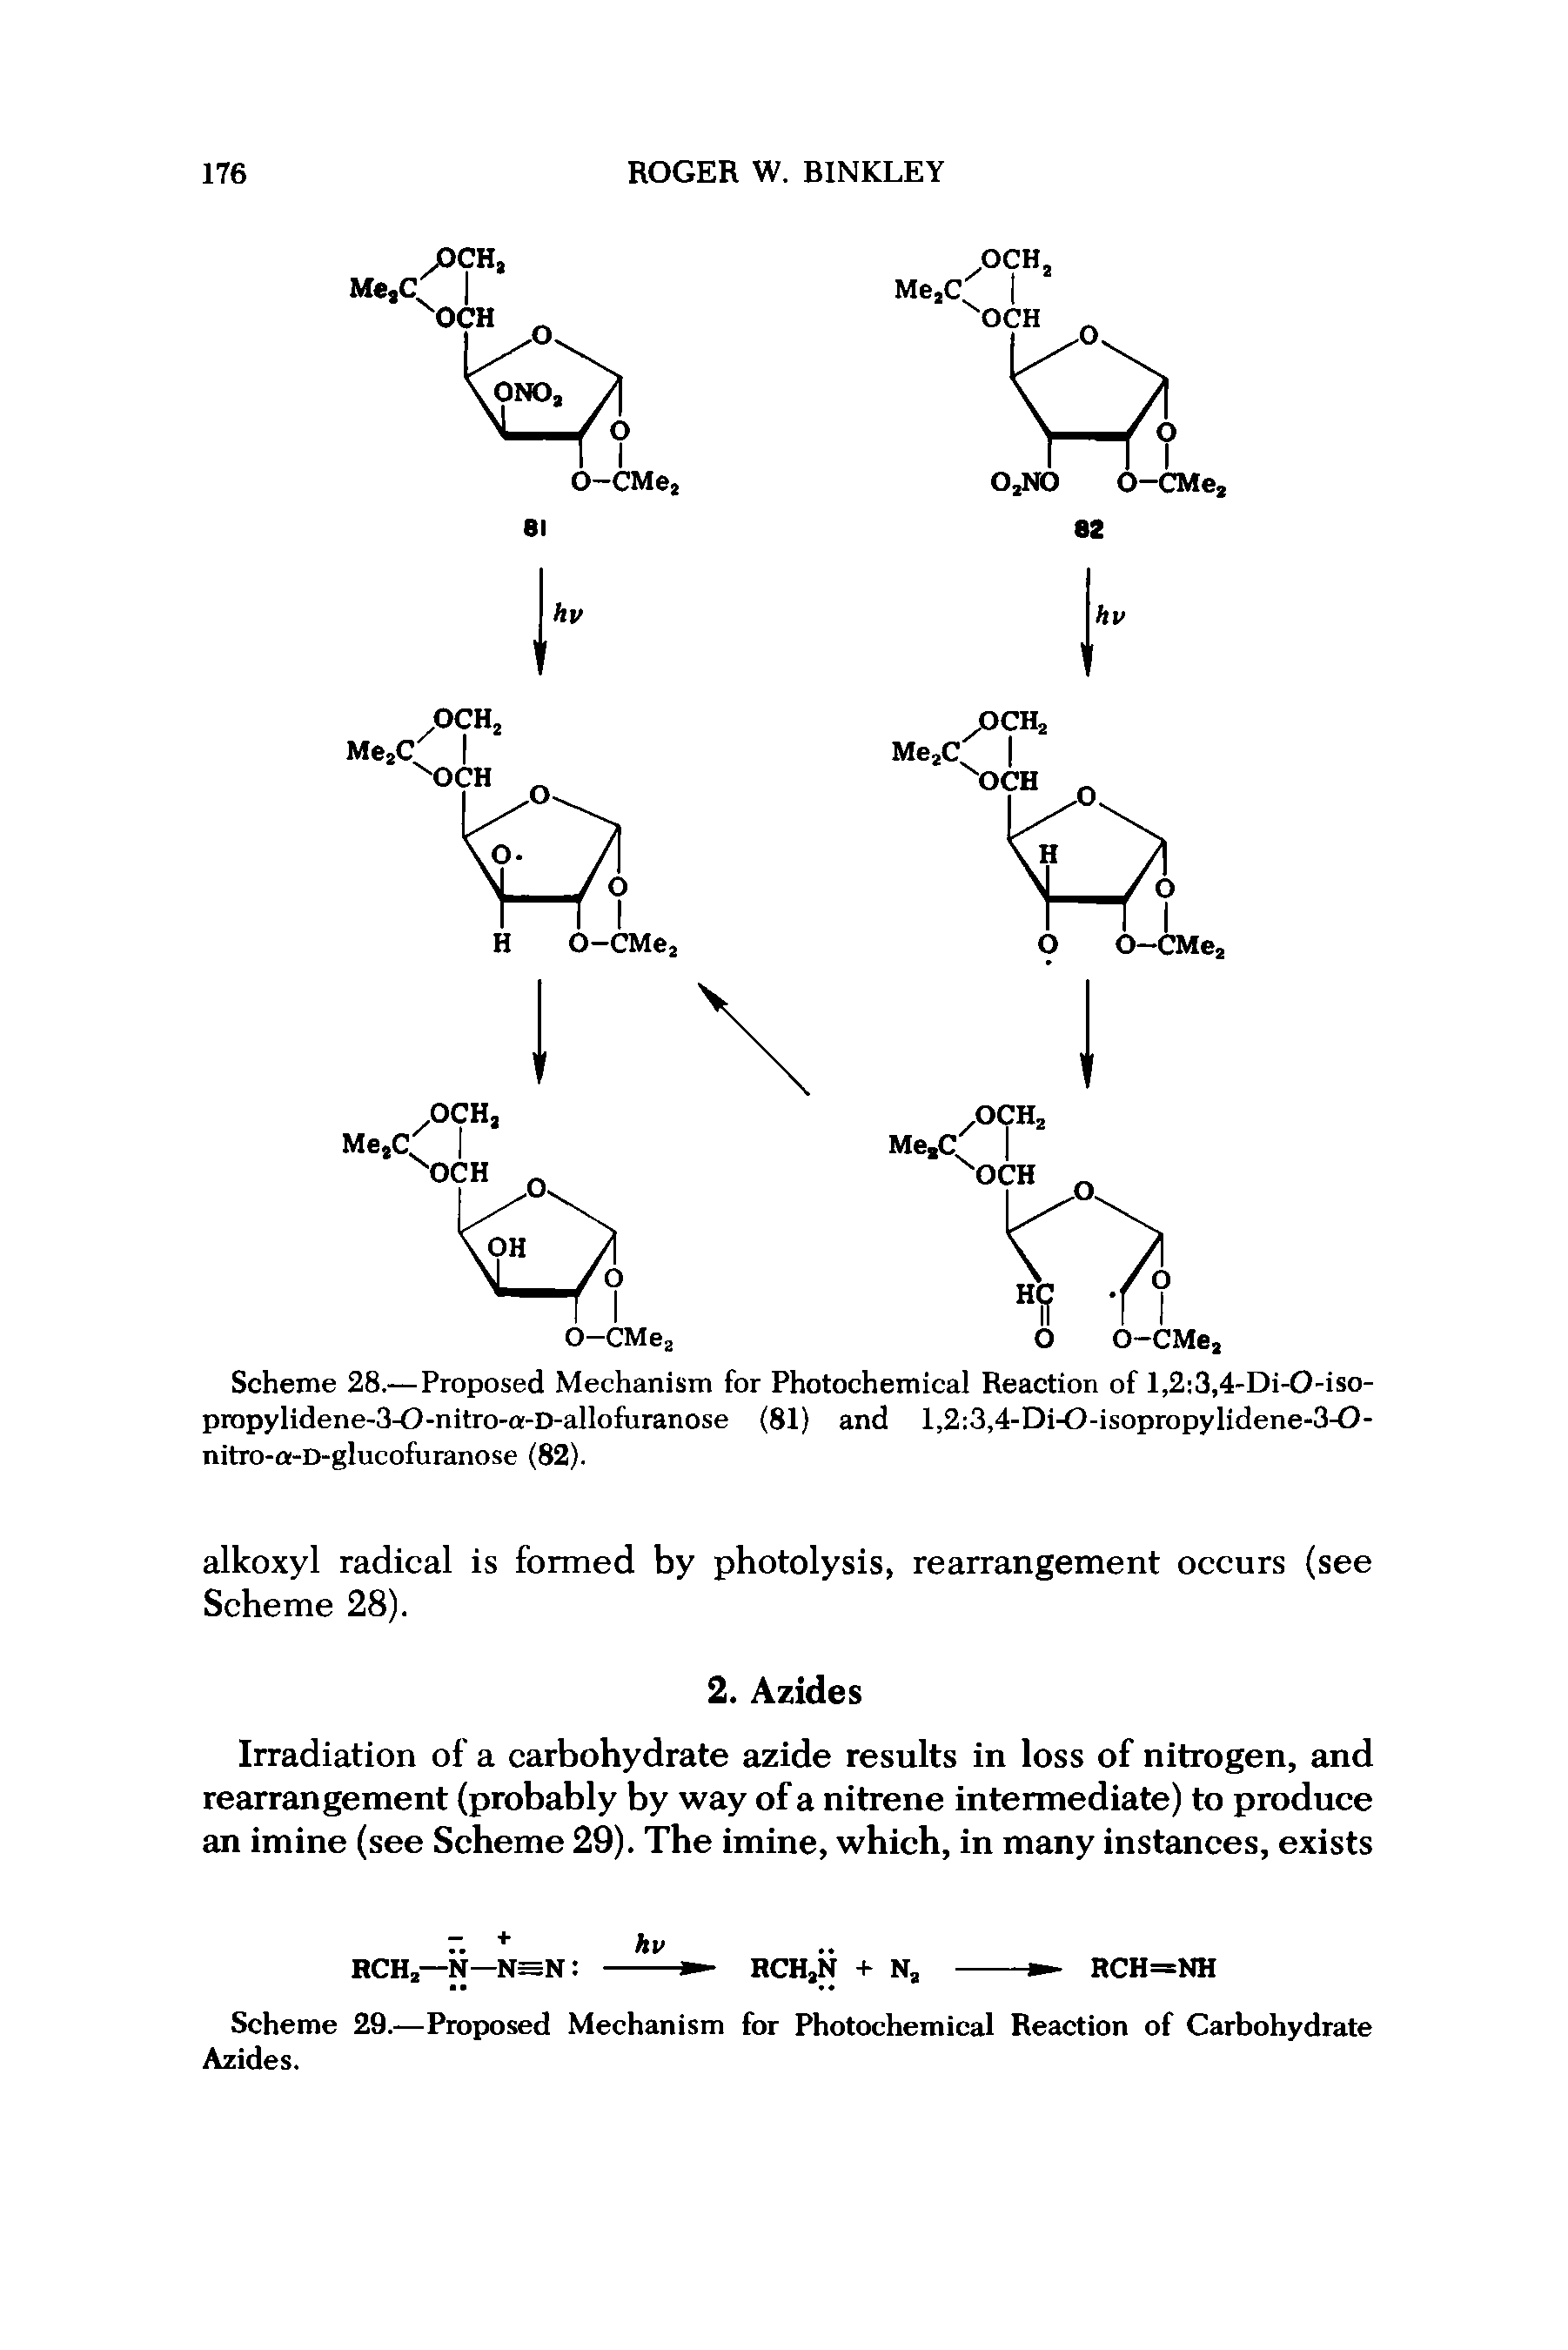 Scheme 28.— Proposed Mechanism for Photochemical Reaction of l,2 3,4-Di-0-iso-propylidene-3-O-nitro-a-D-allofuranose (81) and l,2 3,4-Di-0-isopropylidene-3-0-nitro-a-D-glucofuranose (82).